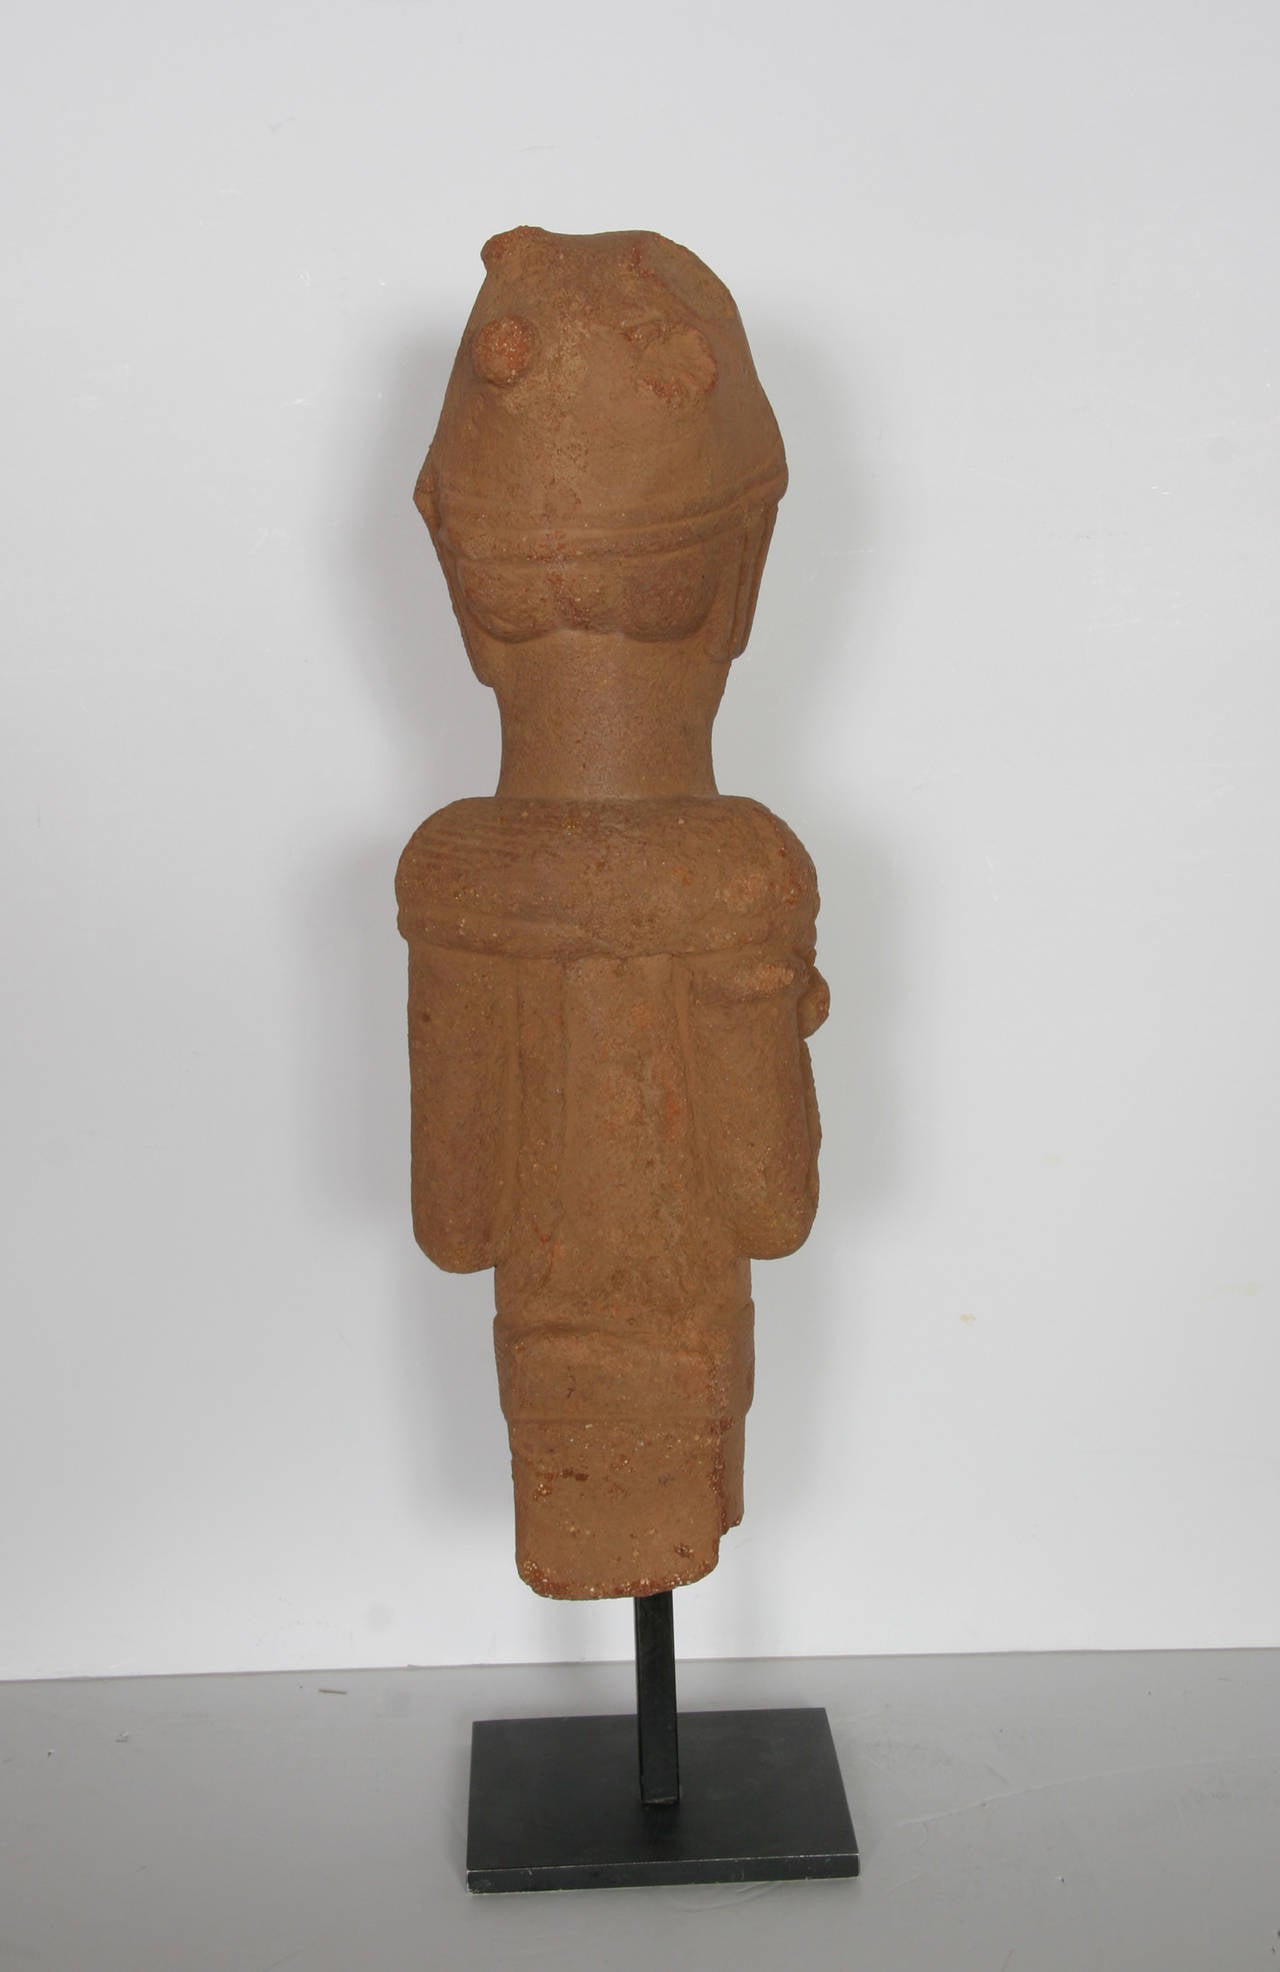 This terracotta sculpture dates back to 500BC-200AD.  The Nok culture appeared in Northern Nigeria around 1000 BC and vanished under unknown circumstances around 300 AD in the region of West Africa.  Total height with Stand 26 inches.